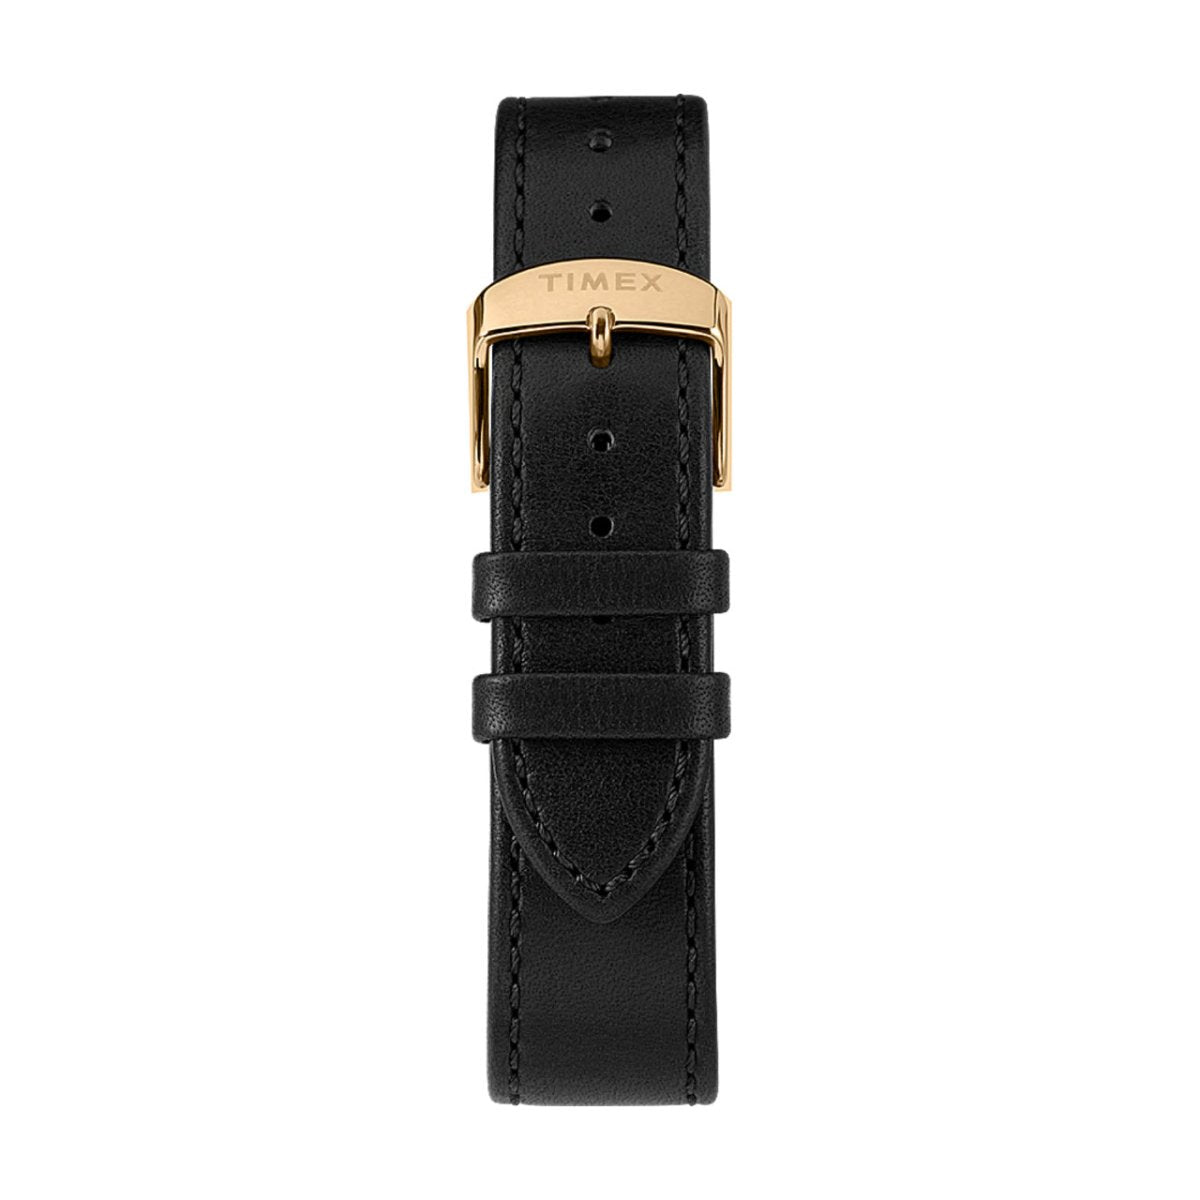 Timex Archive Marlin Automatic 40mm Leather Strap (Schwarz / Gold)  - Allike Store